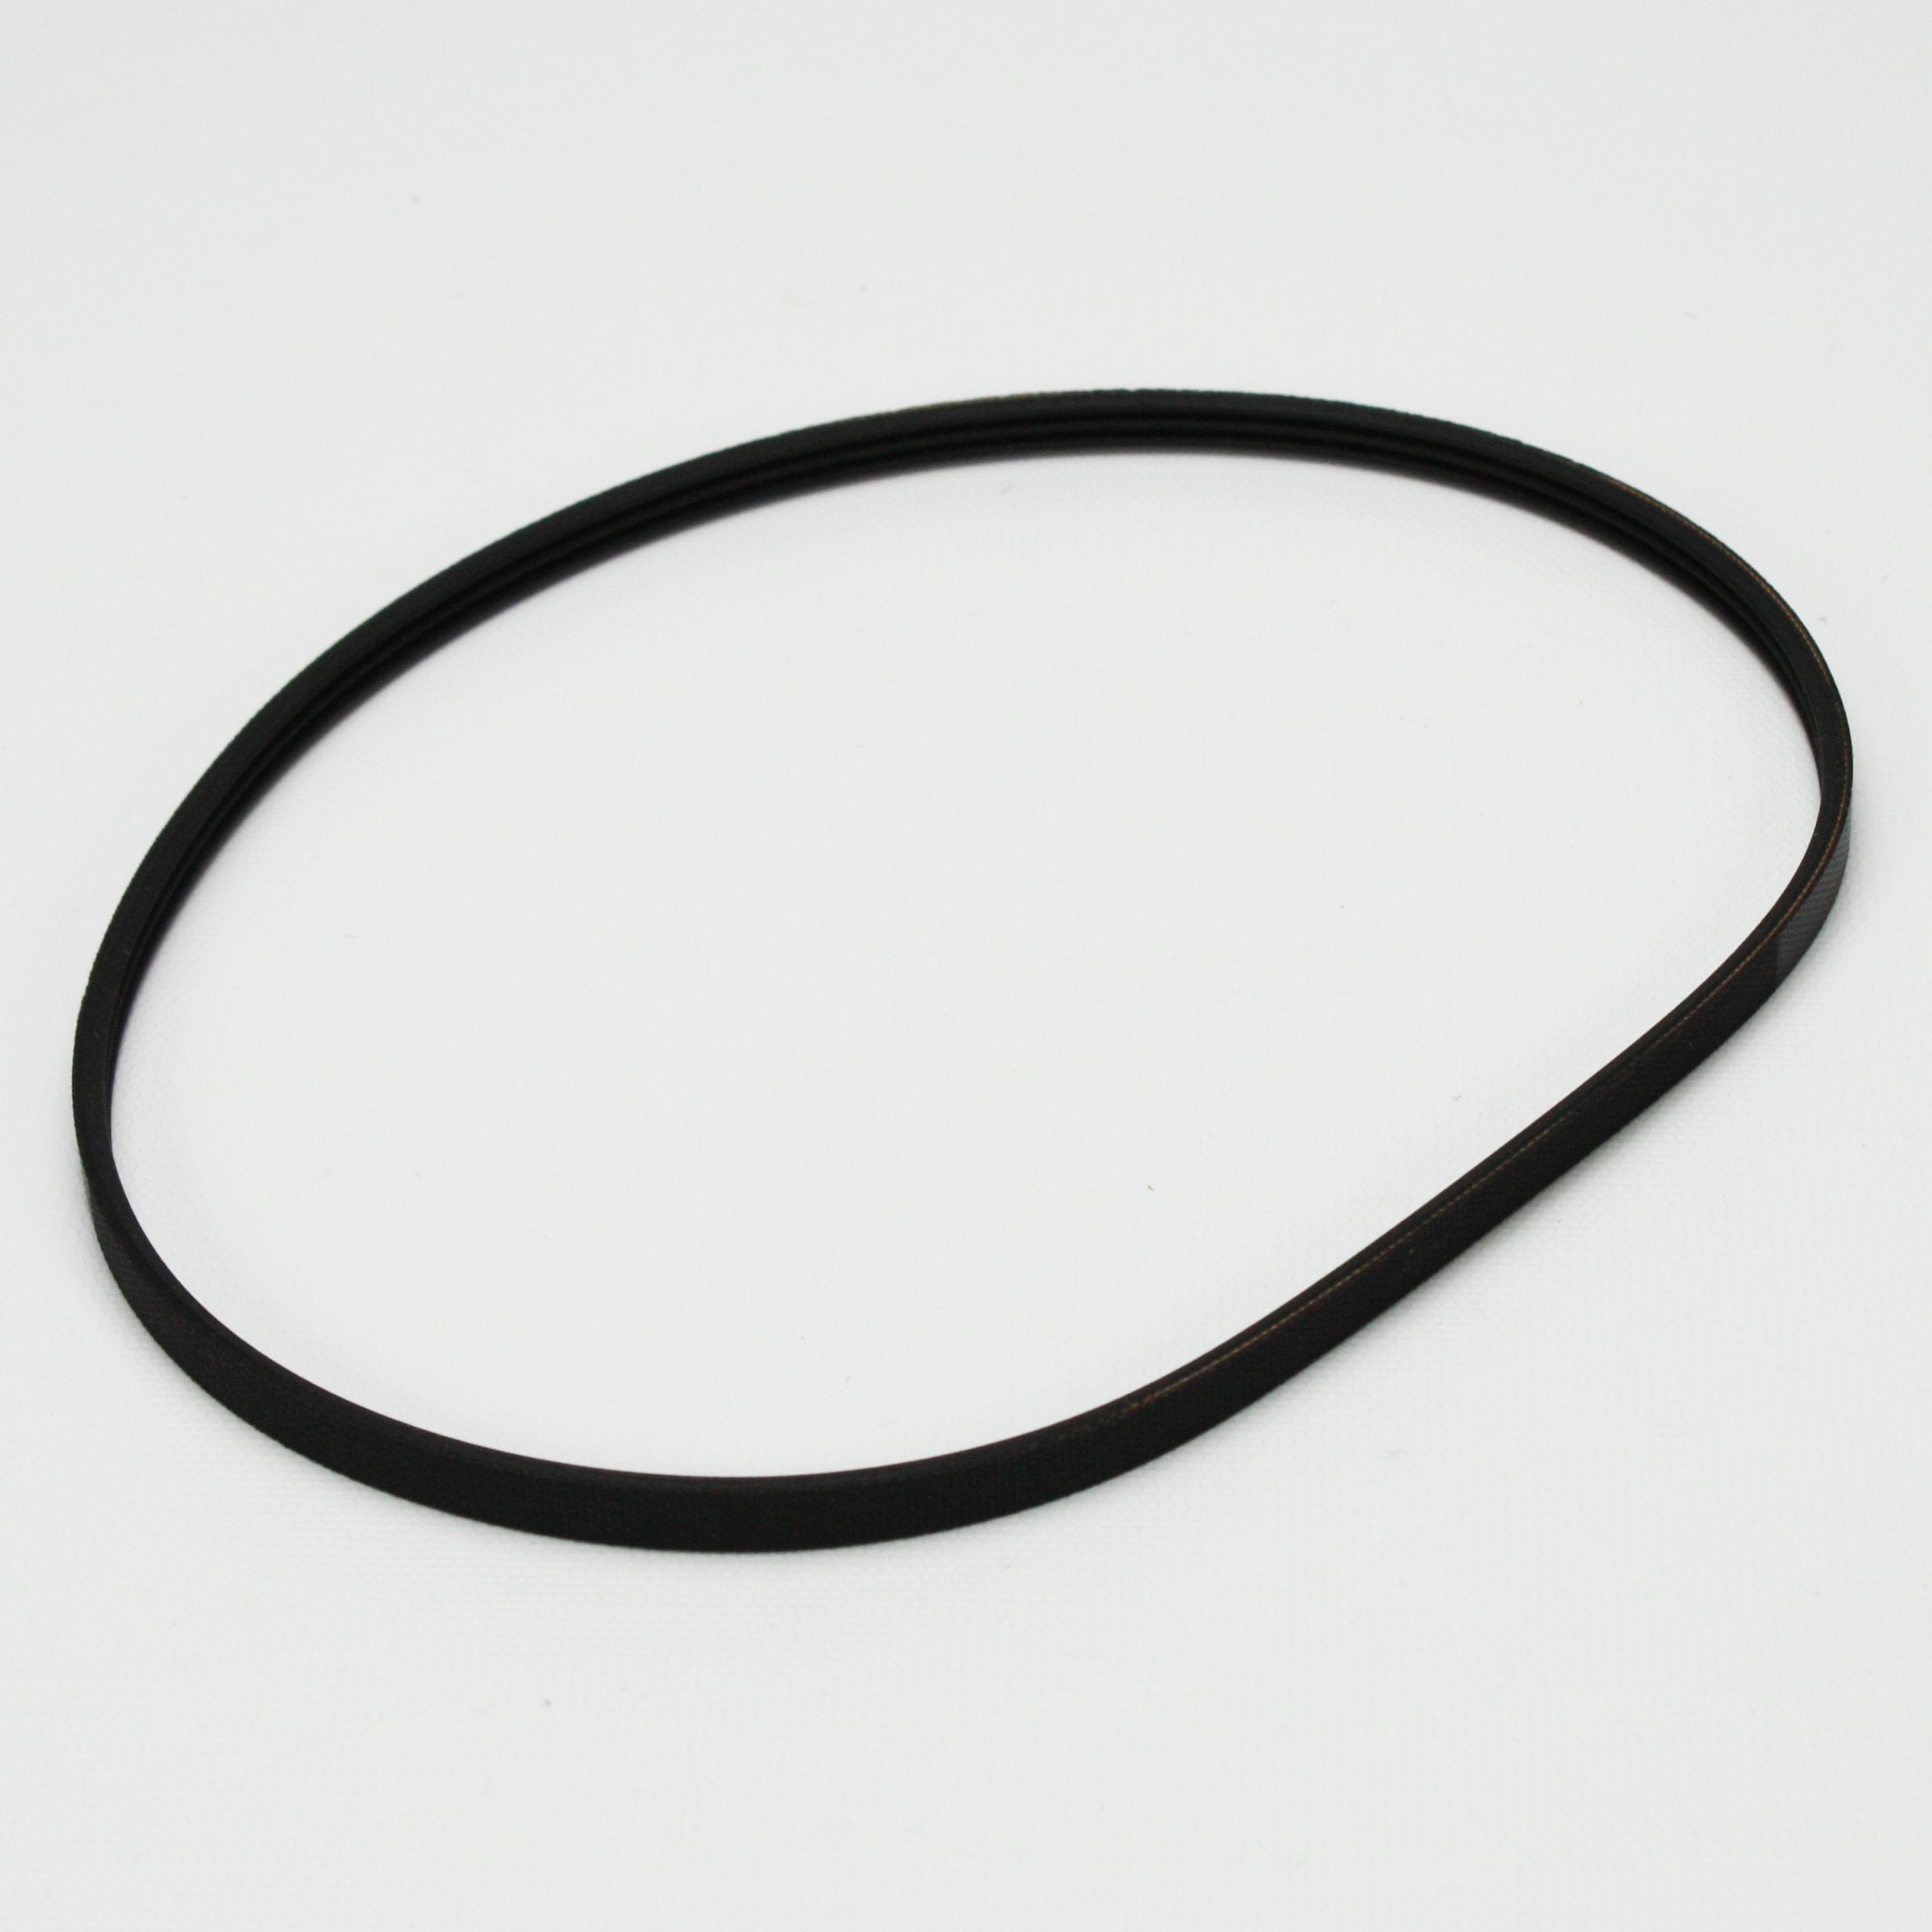 Clothes Dryer Blower Belt for Whirlpool, Sears, 8544742 (Original Version)  - Very Good